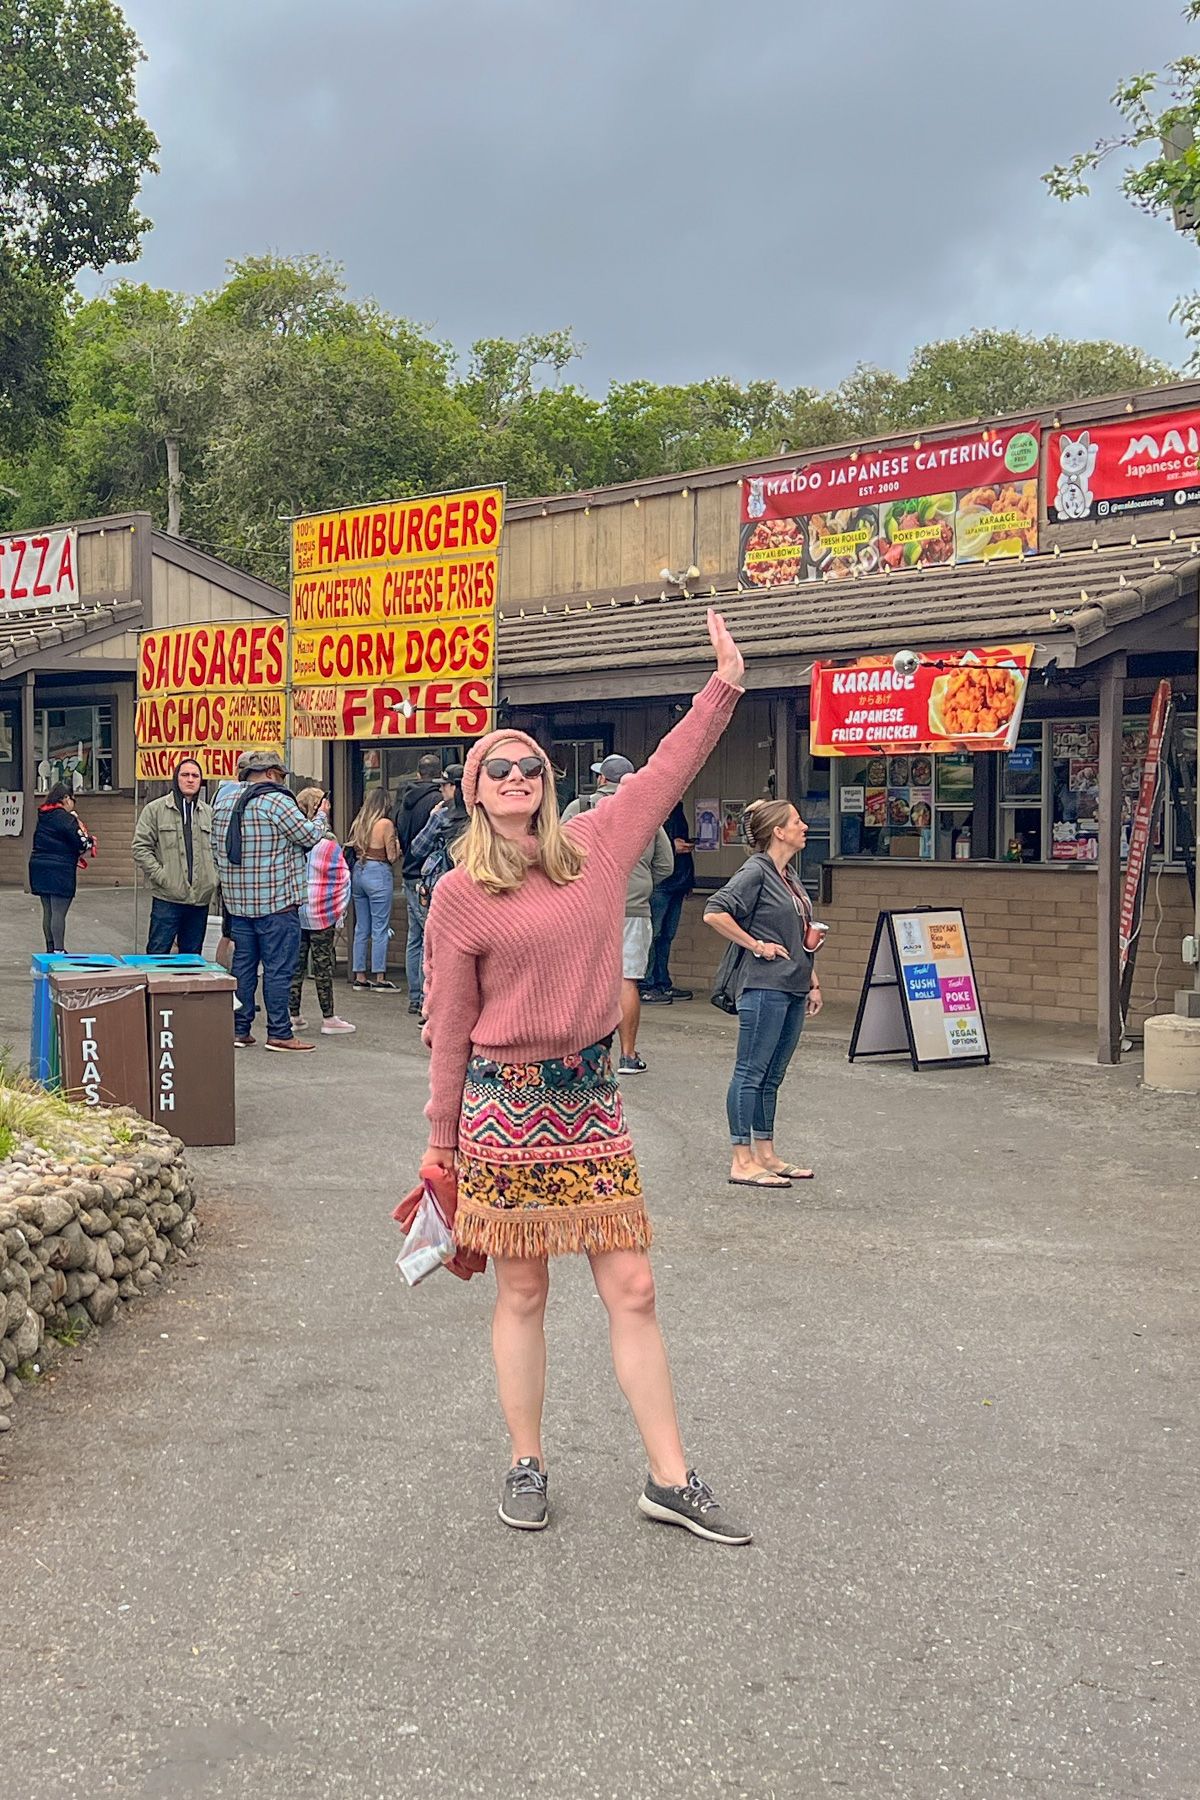 A young woman wearing a pink turtleneck sweater and a printed mini-skirt poses with one arm up in front of a row of fast food stands on a cloudy day.